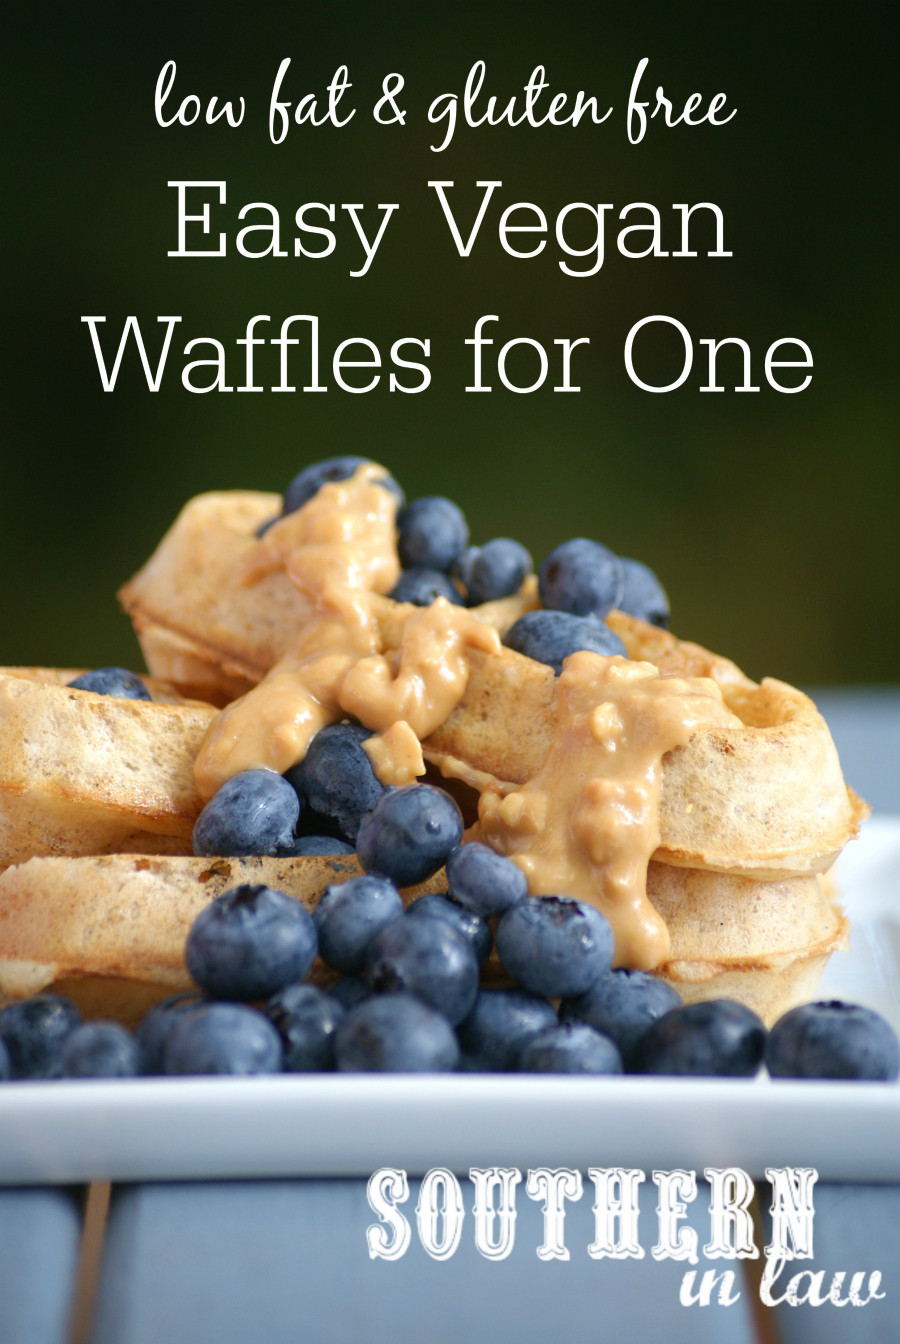 Easy Vegan Waffles
 Southern In Law Recipe The Best Easy Vegan Waffles for